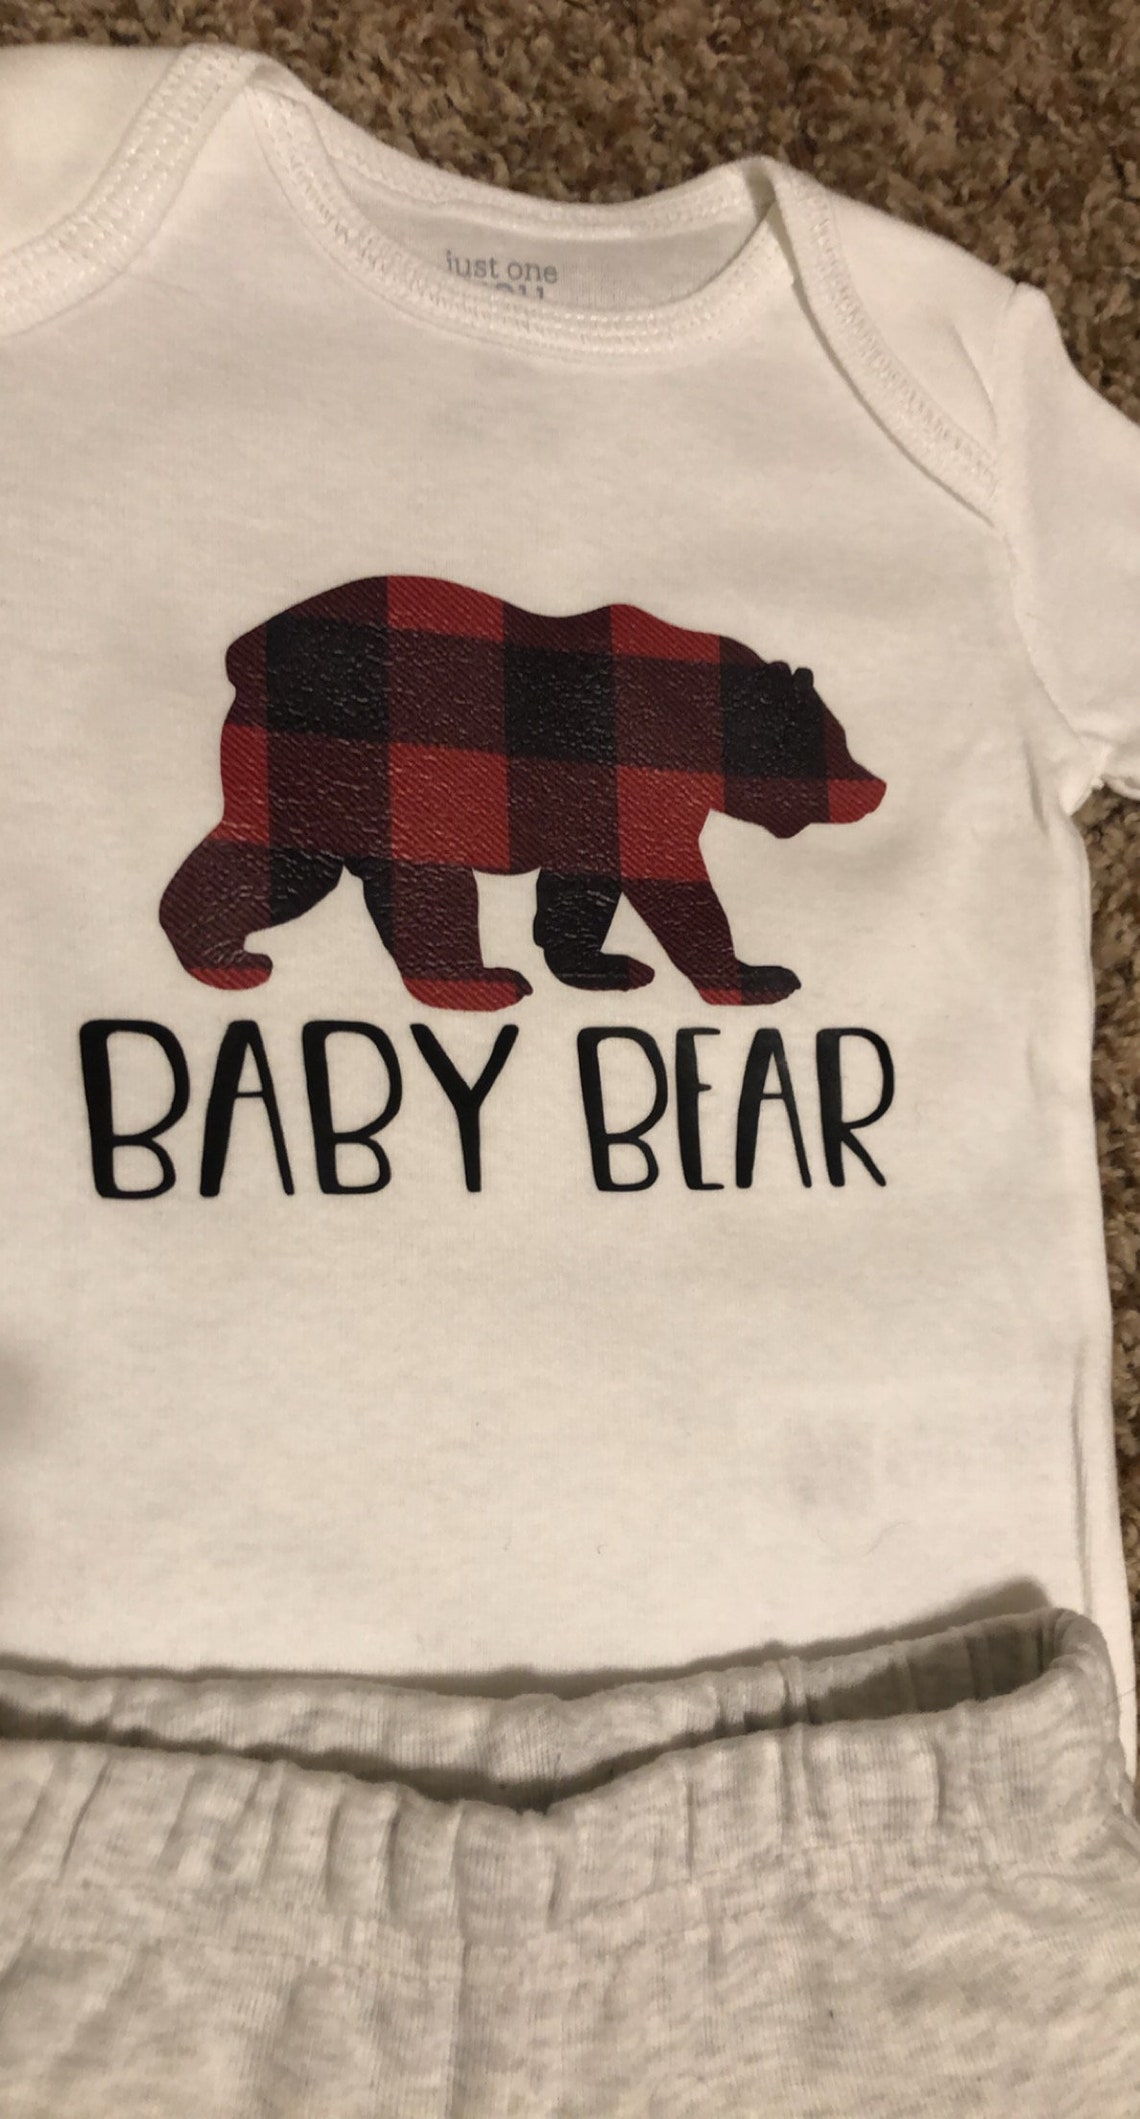 Customized Baby Bear infant outfit. 2 piece set. | Etsy